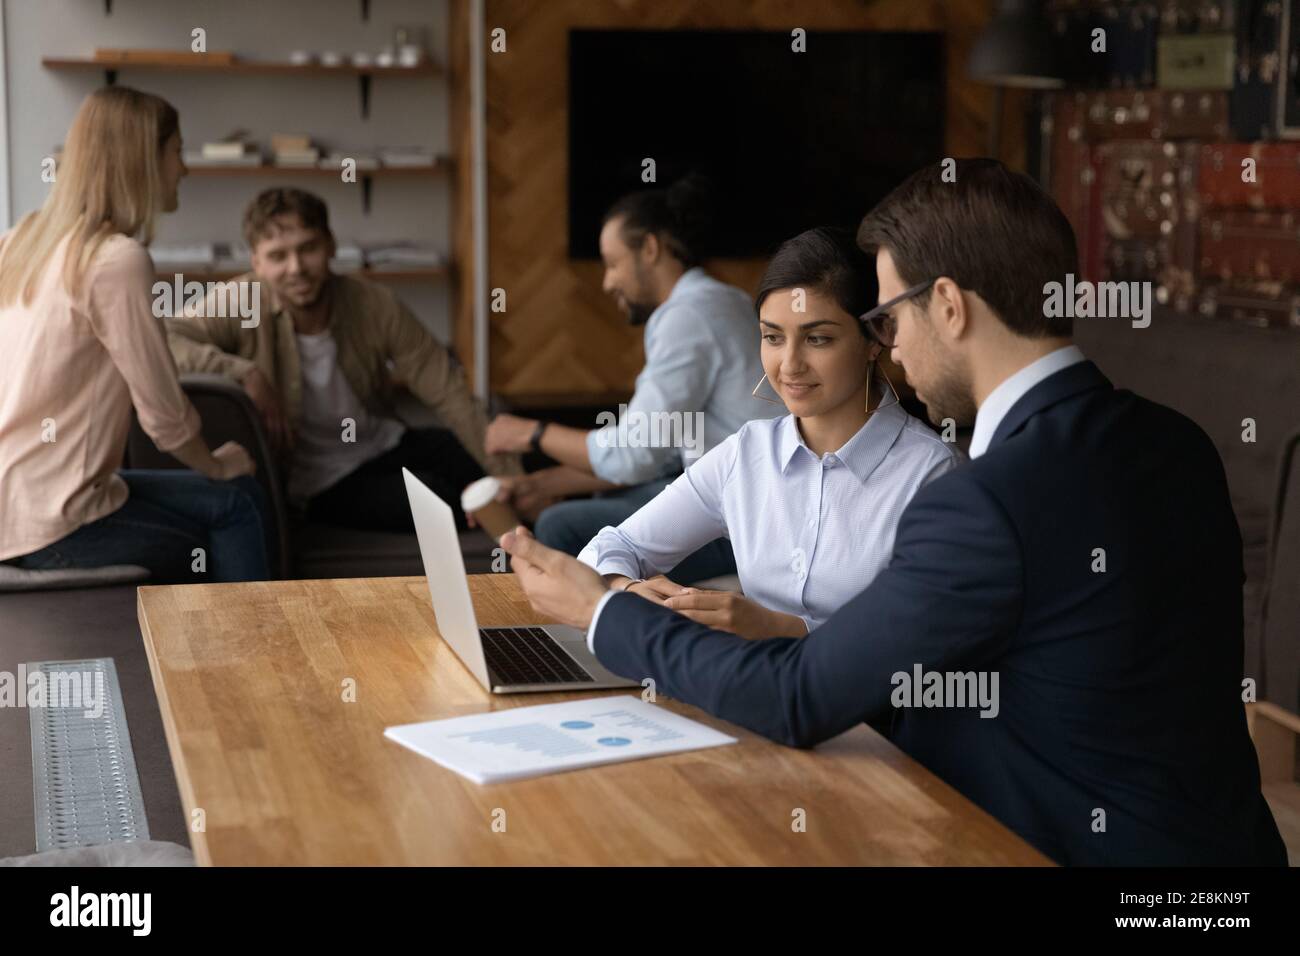 Confident leader instruct young mixed race woman new staff member Stock Photo